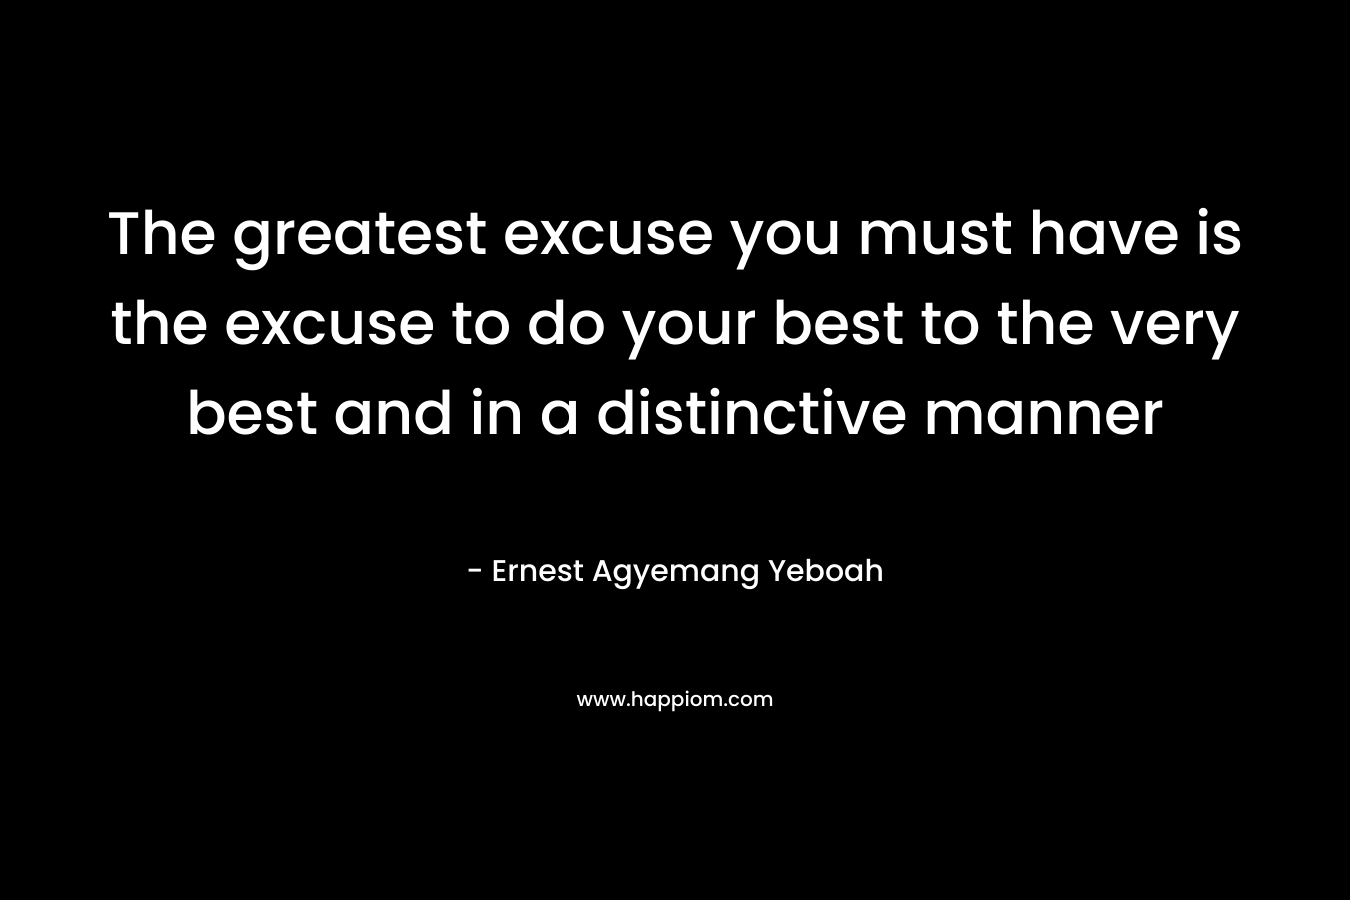 The greatest excuse you must have is the excuse to do your best to the very best and in a distinctive manner